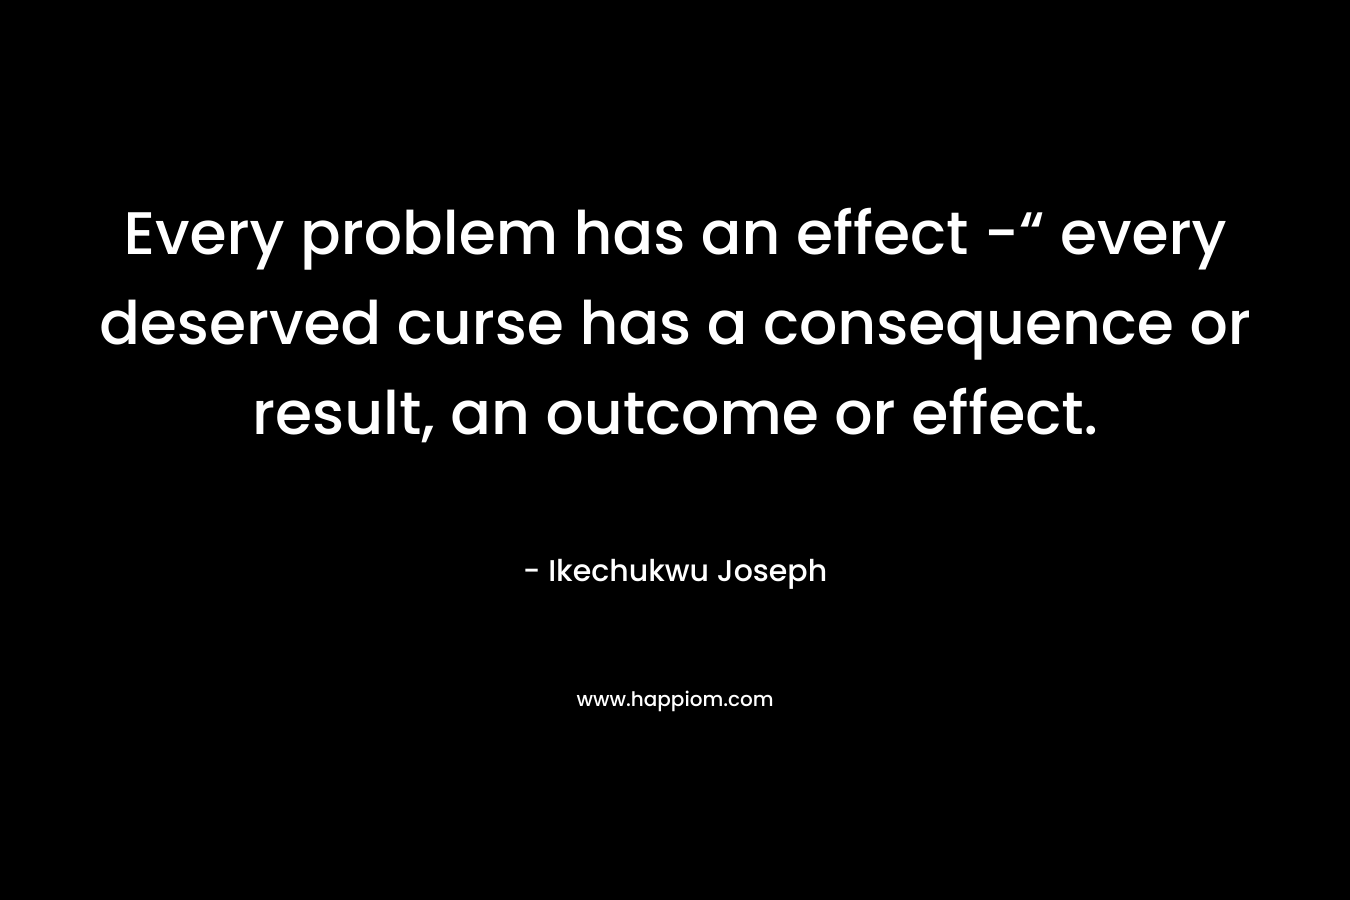 Every problem has an effect -“ every deserved curse has a consequence or result, an outcome or effect. – Ikechukwu Joseph